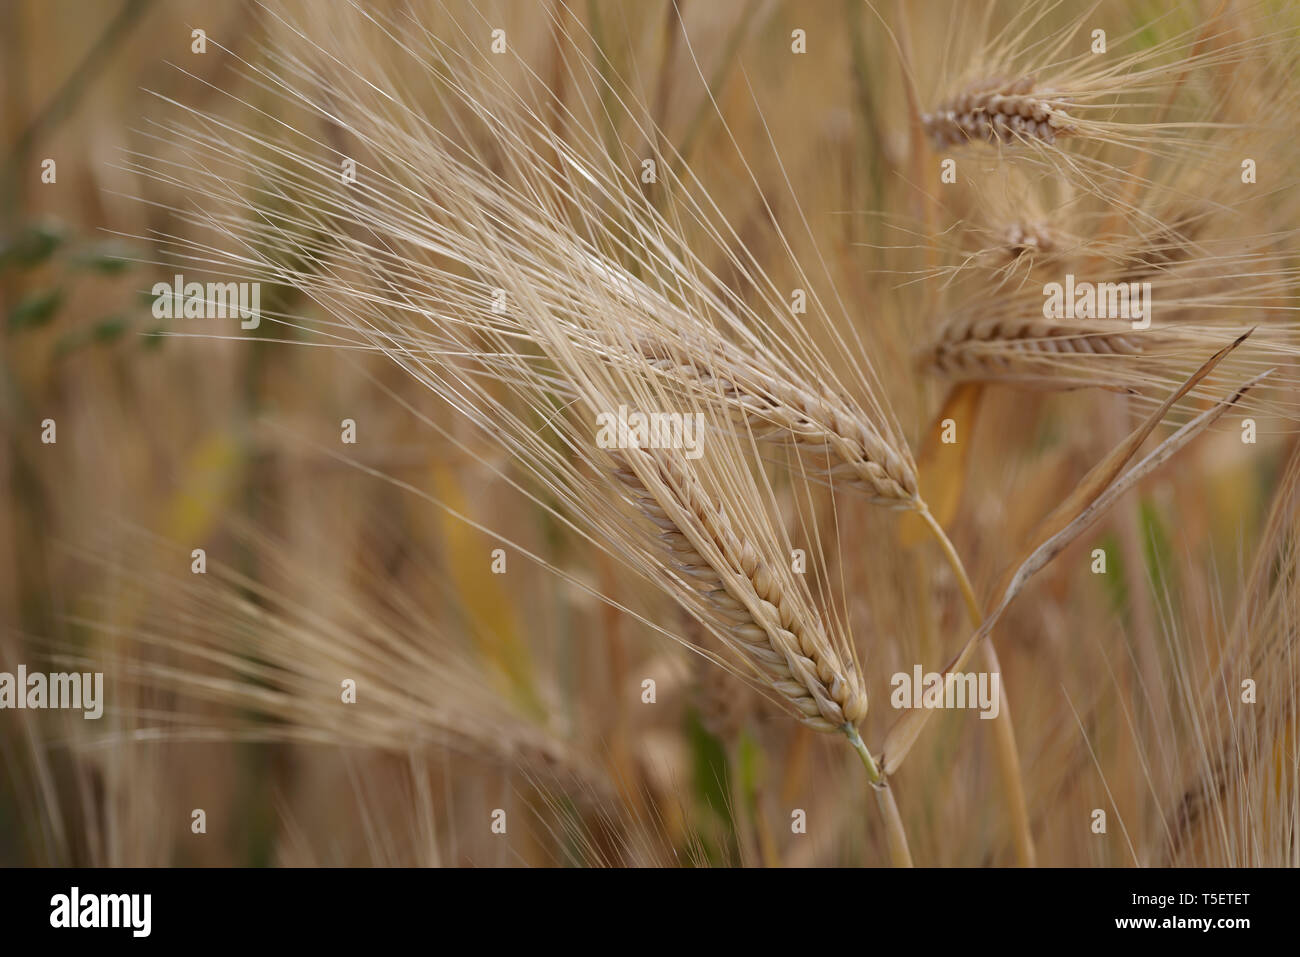 Close up shot of two cereal plant stems against the plantation Stock Photo